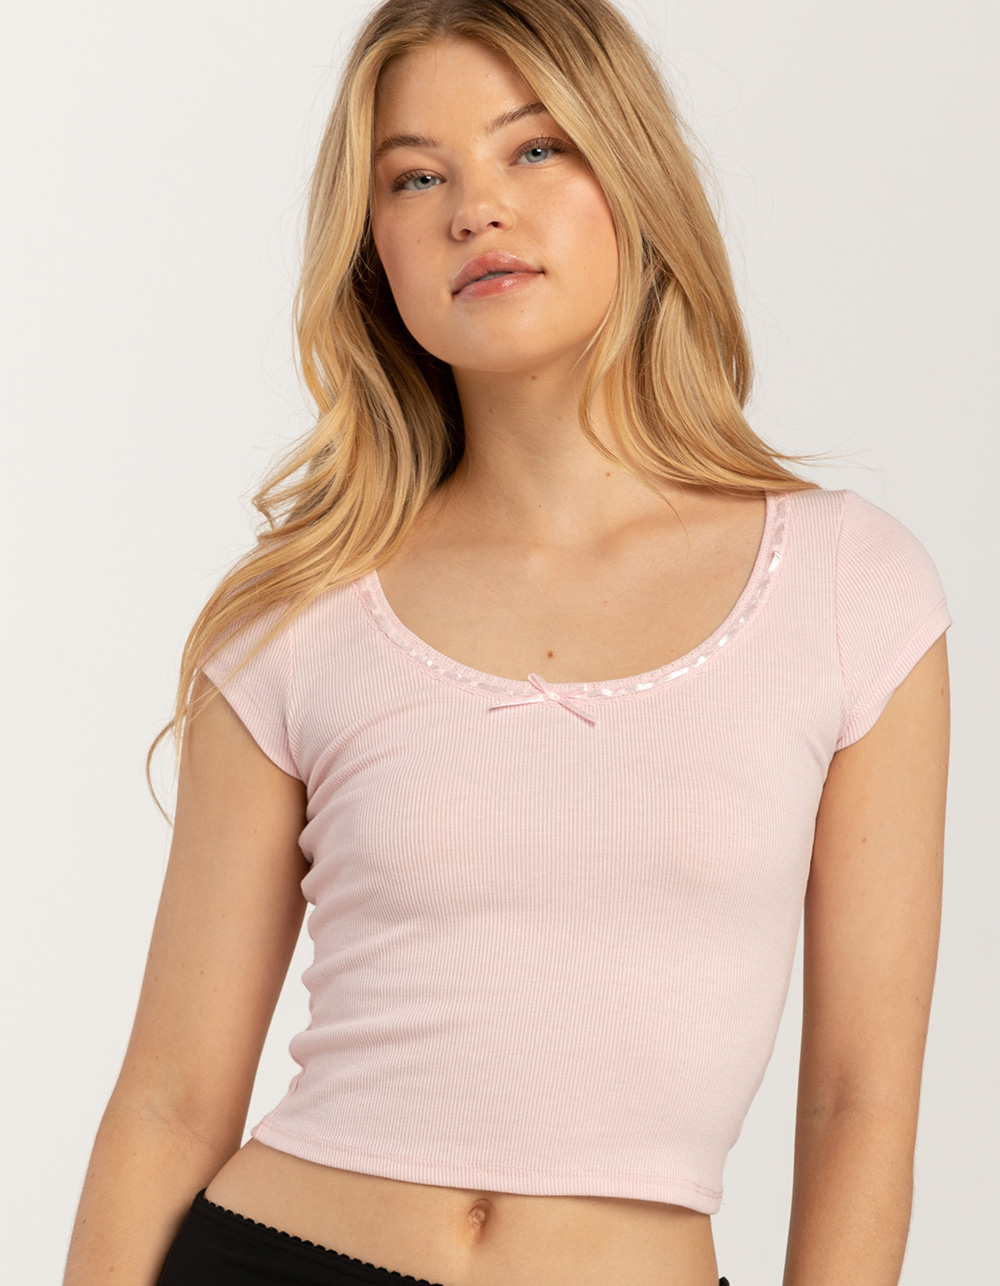 HEART & HIPS Bow Detailing Scoop Neck Womens Tee